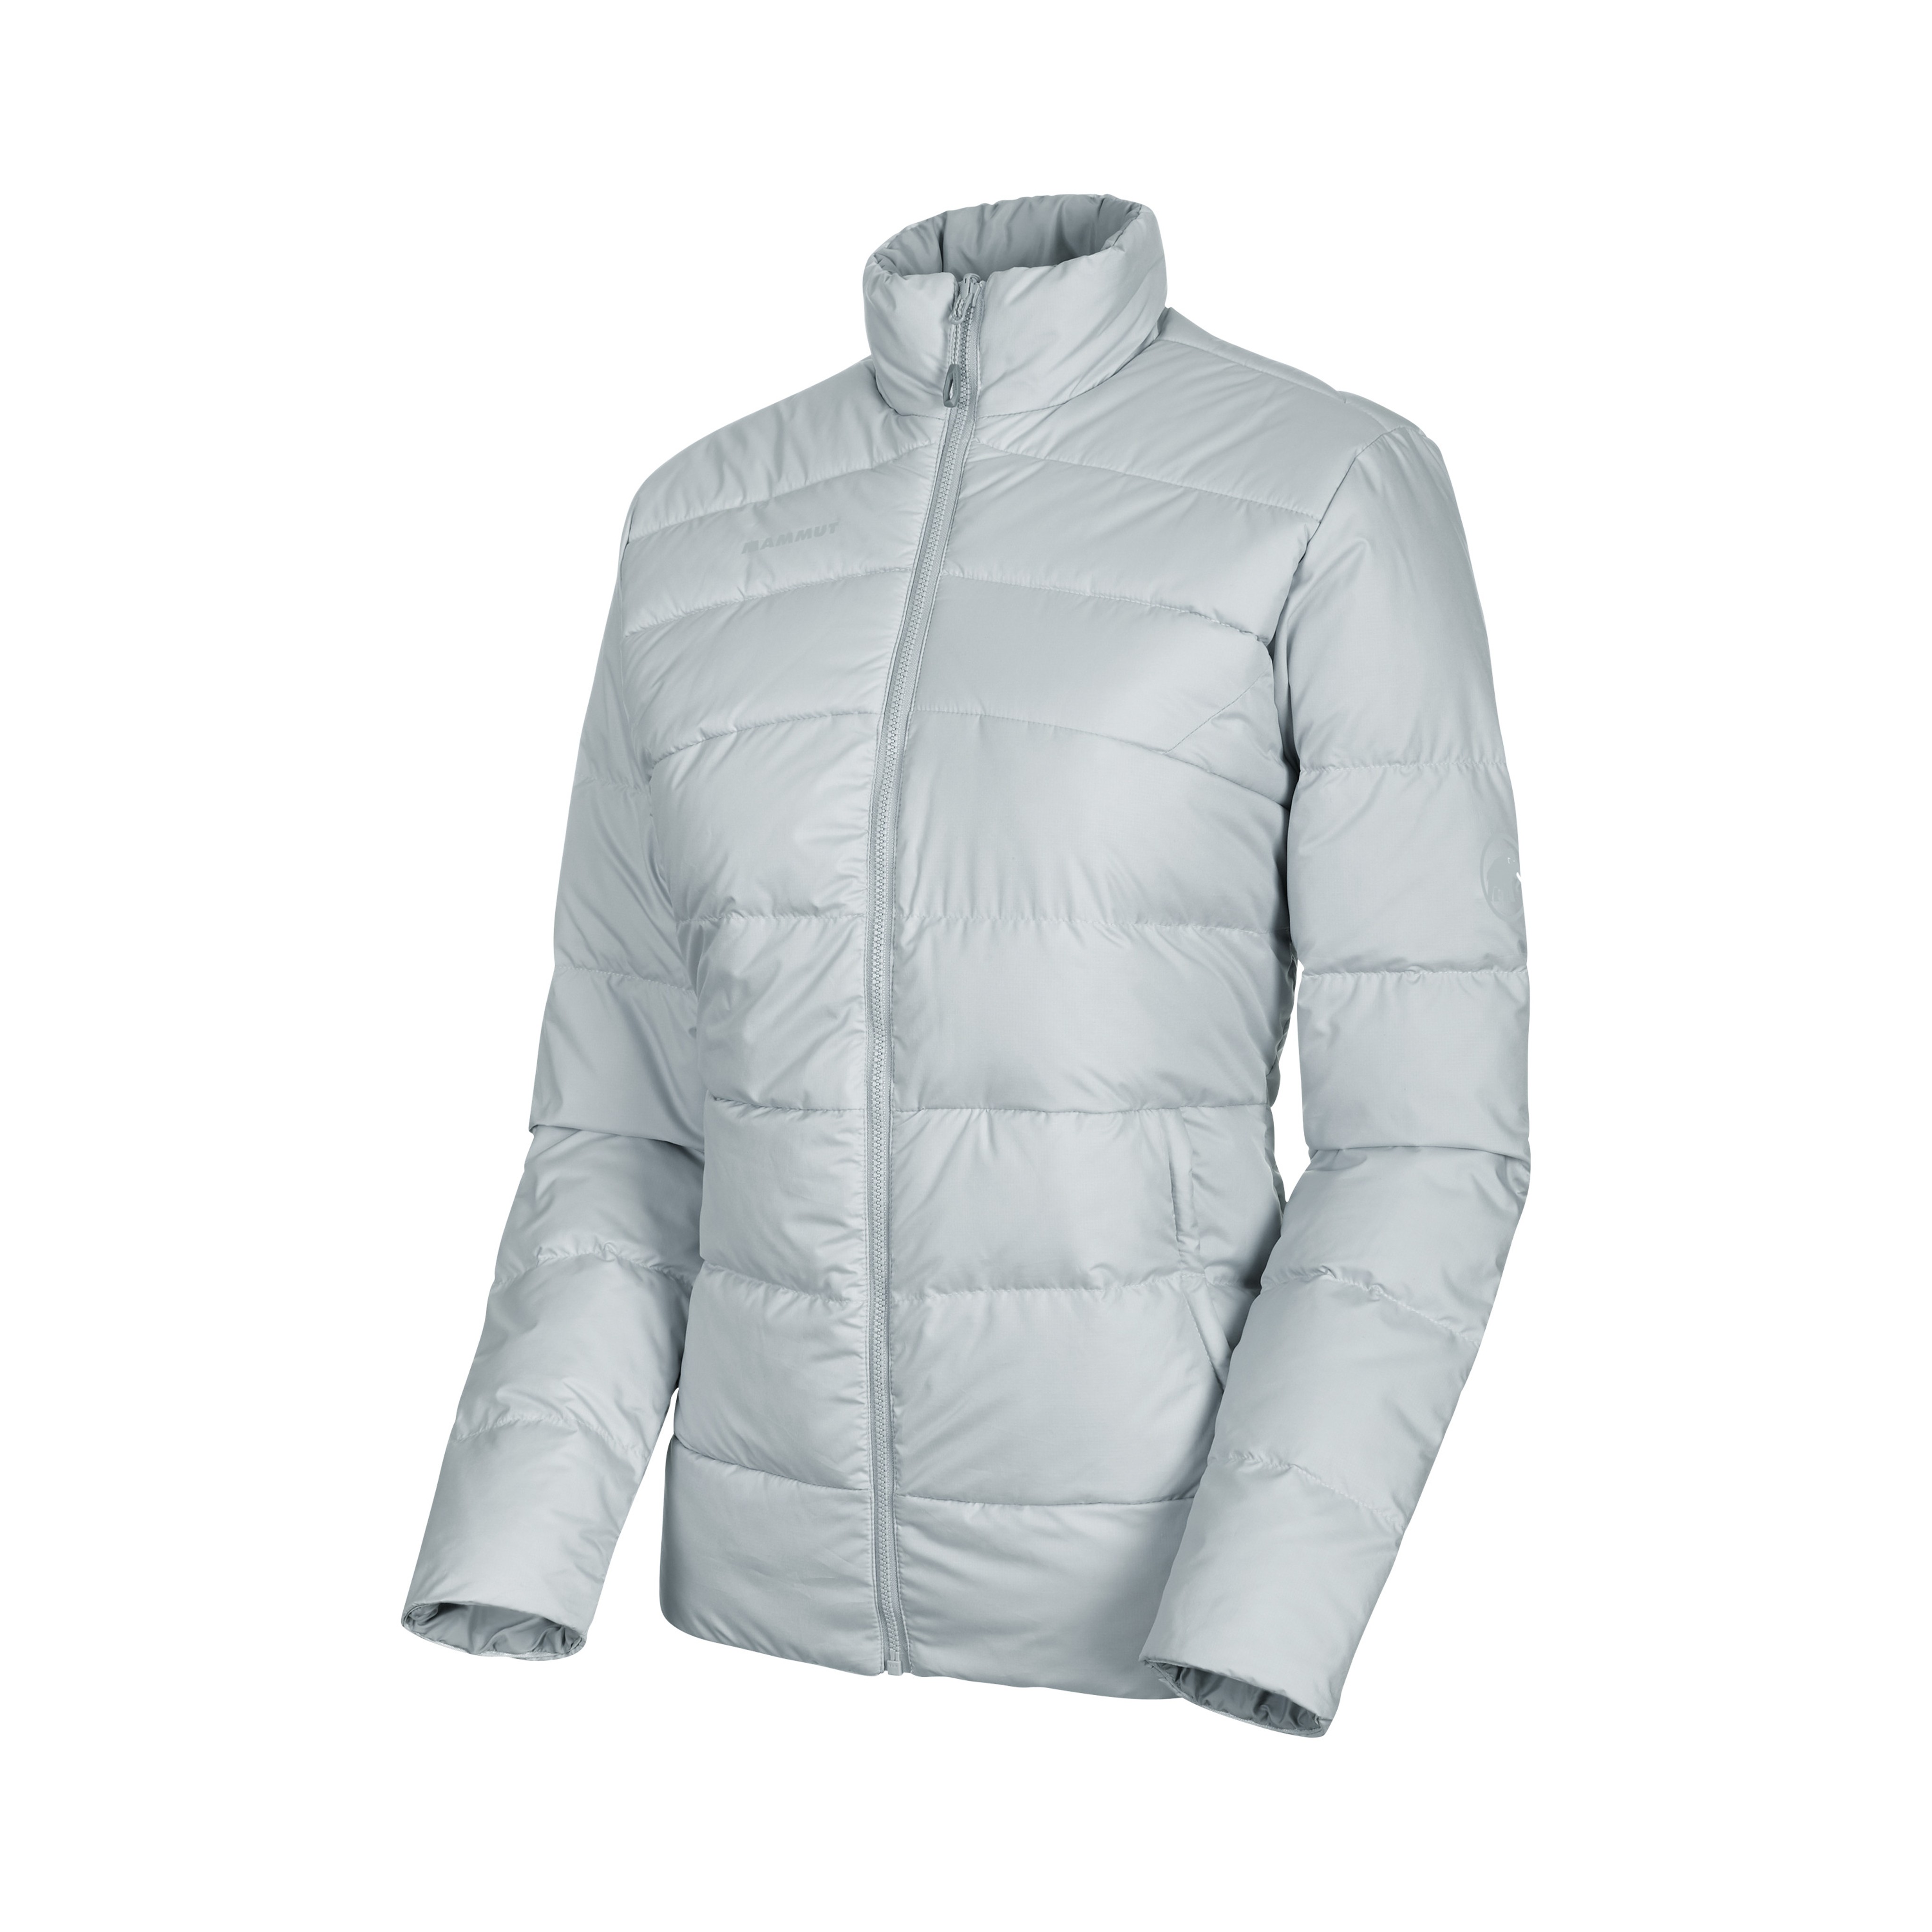 Whitehorn IN Jacket Women product image